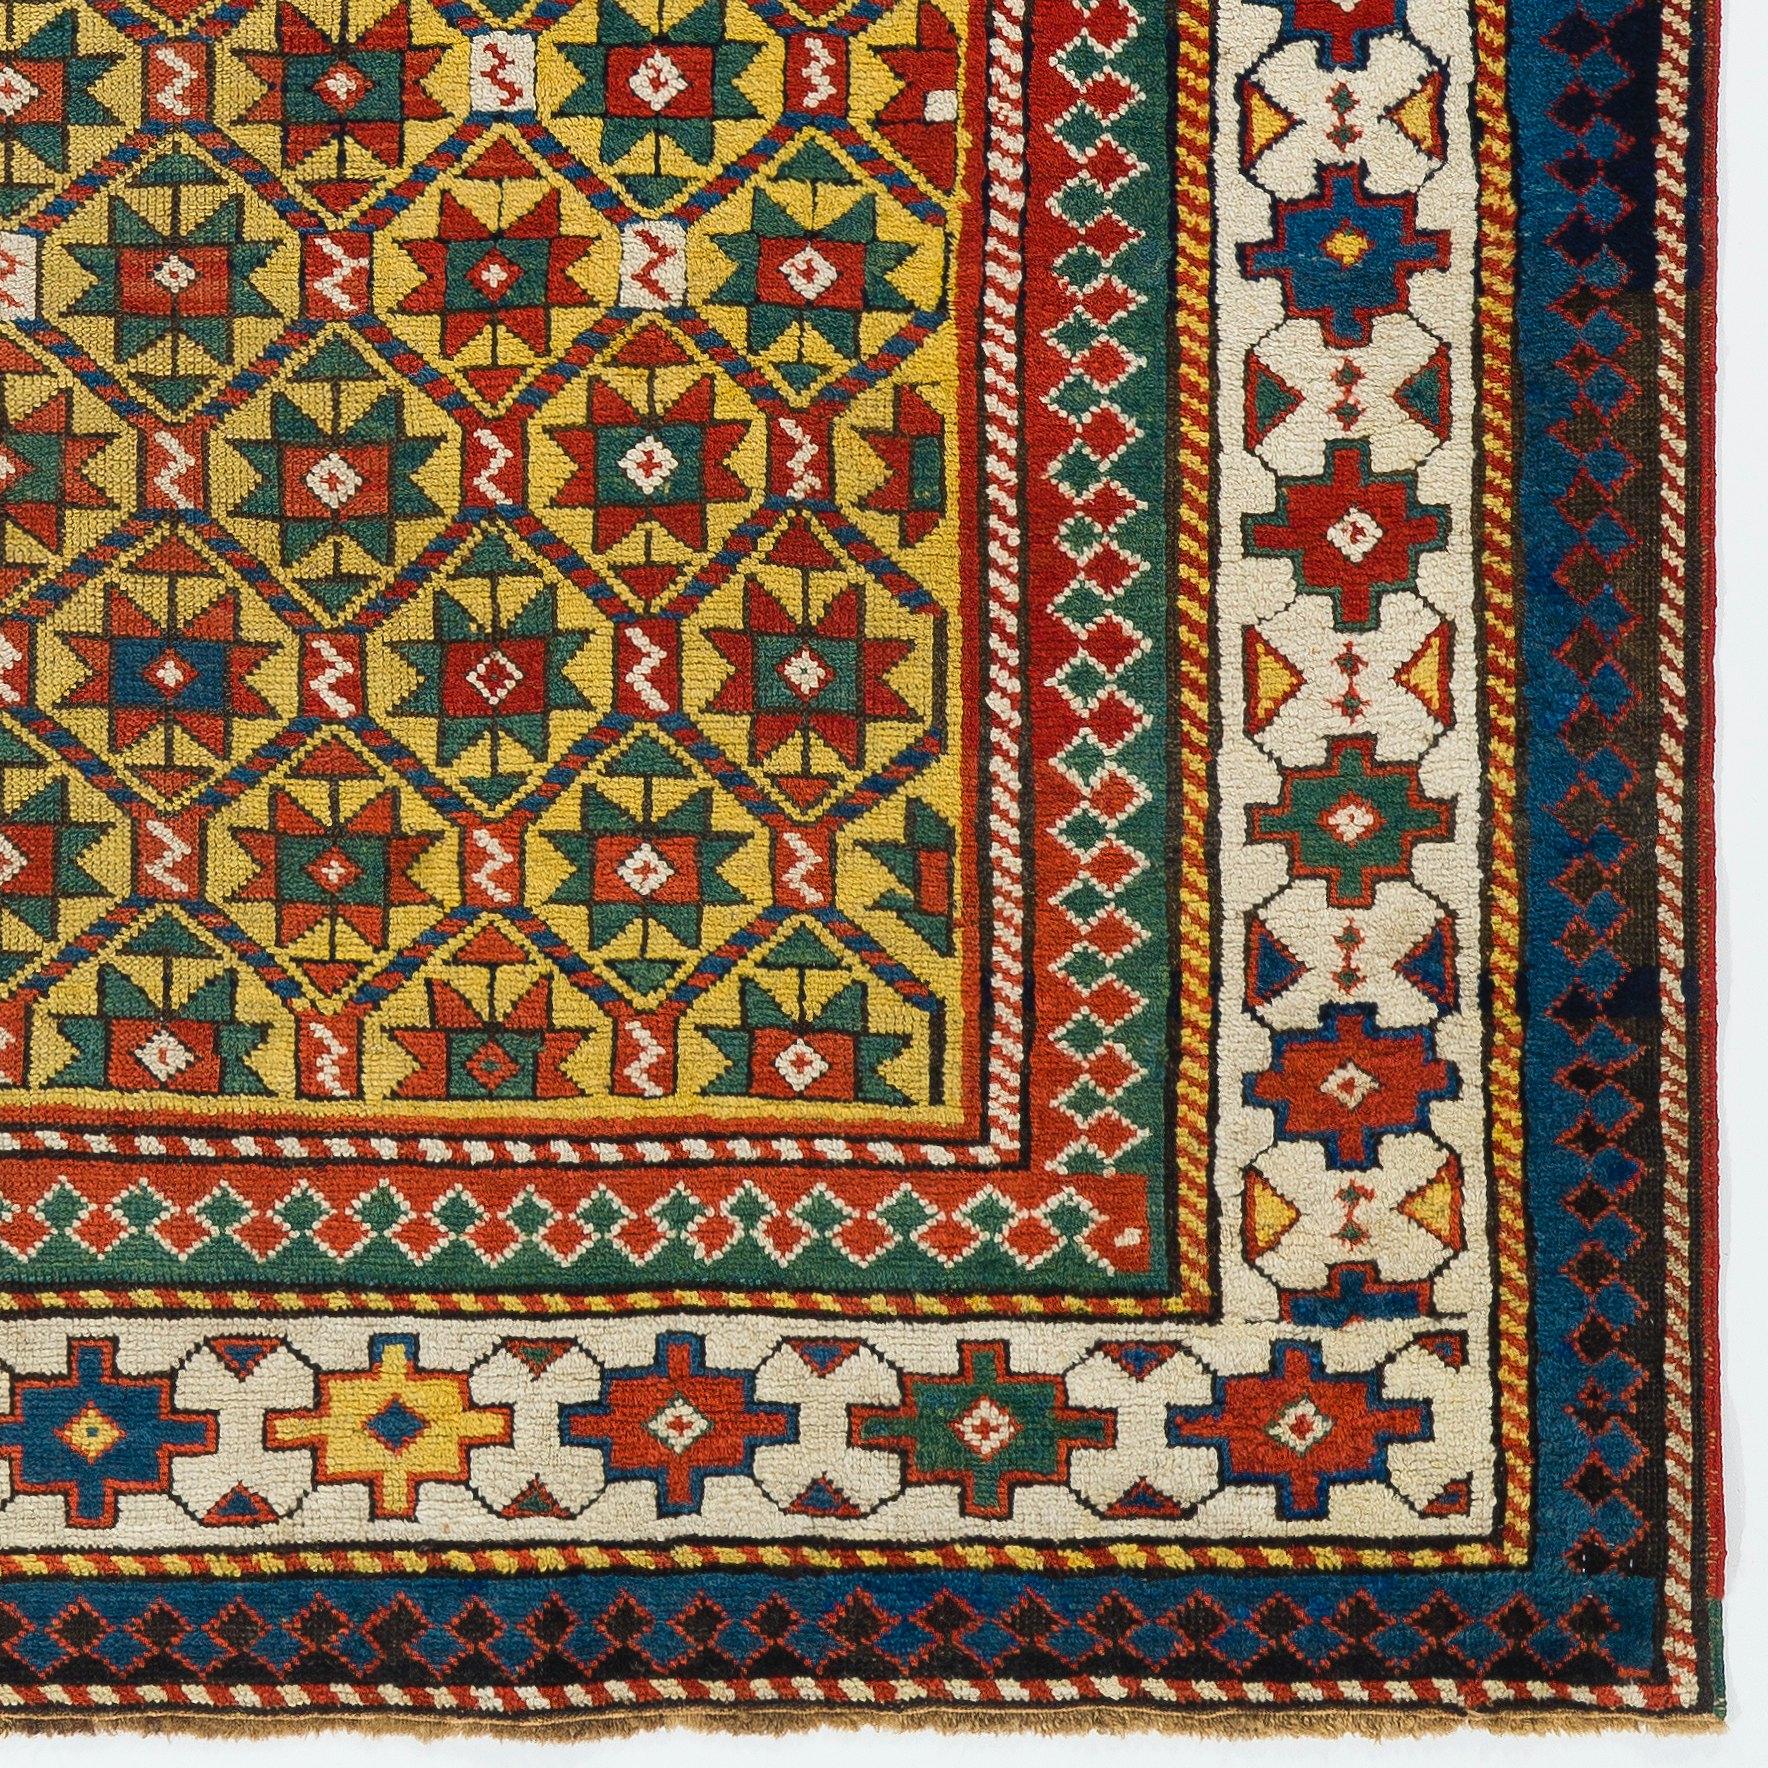 Antique yellow ground Gendje rug, South Caucasus, circa 1880. Finely hand-knotted with even medium wool pile on wool foundation. Very good condition. Sturdy and as clean as a brand new rug (deep washed professionally). Measures: 4.5 x 6.7 Ft